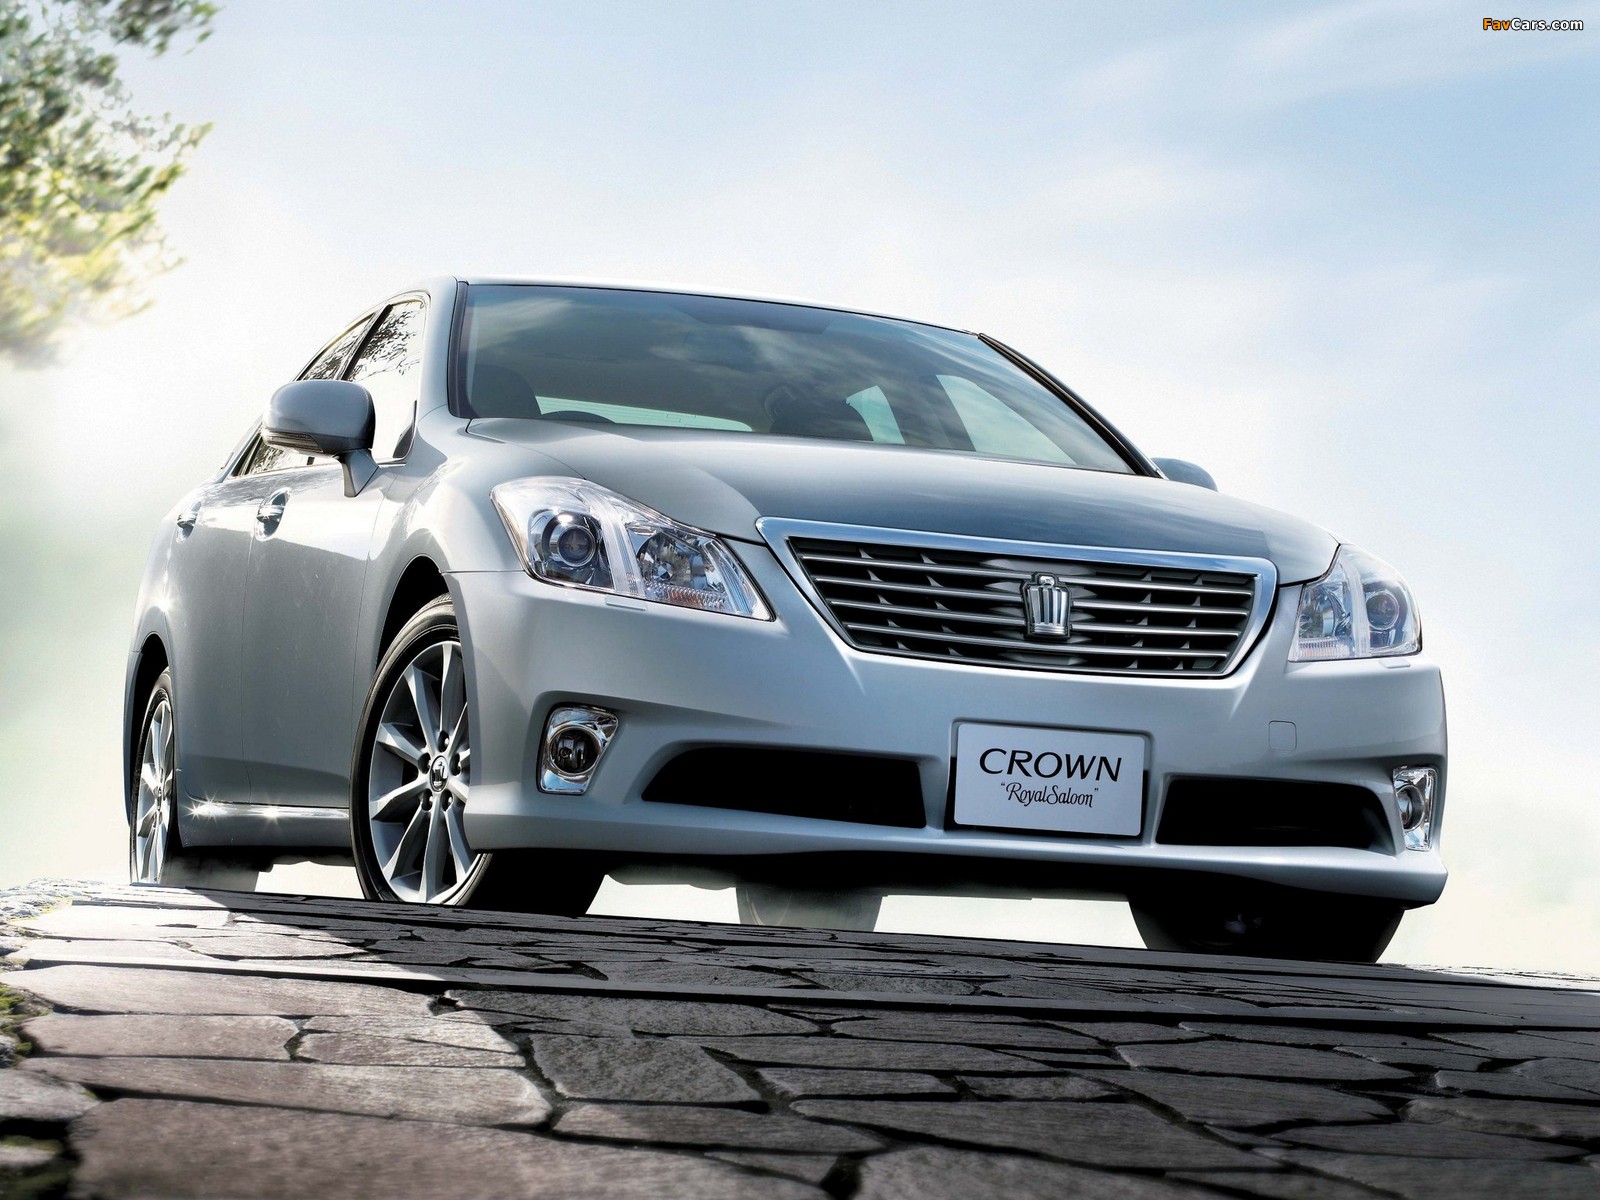 Toyota Crown Royal Saloon (S200) 2010 images (1600 x 1200)